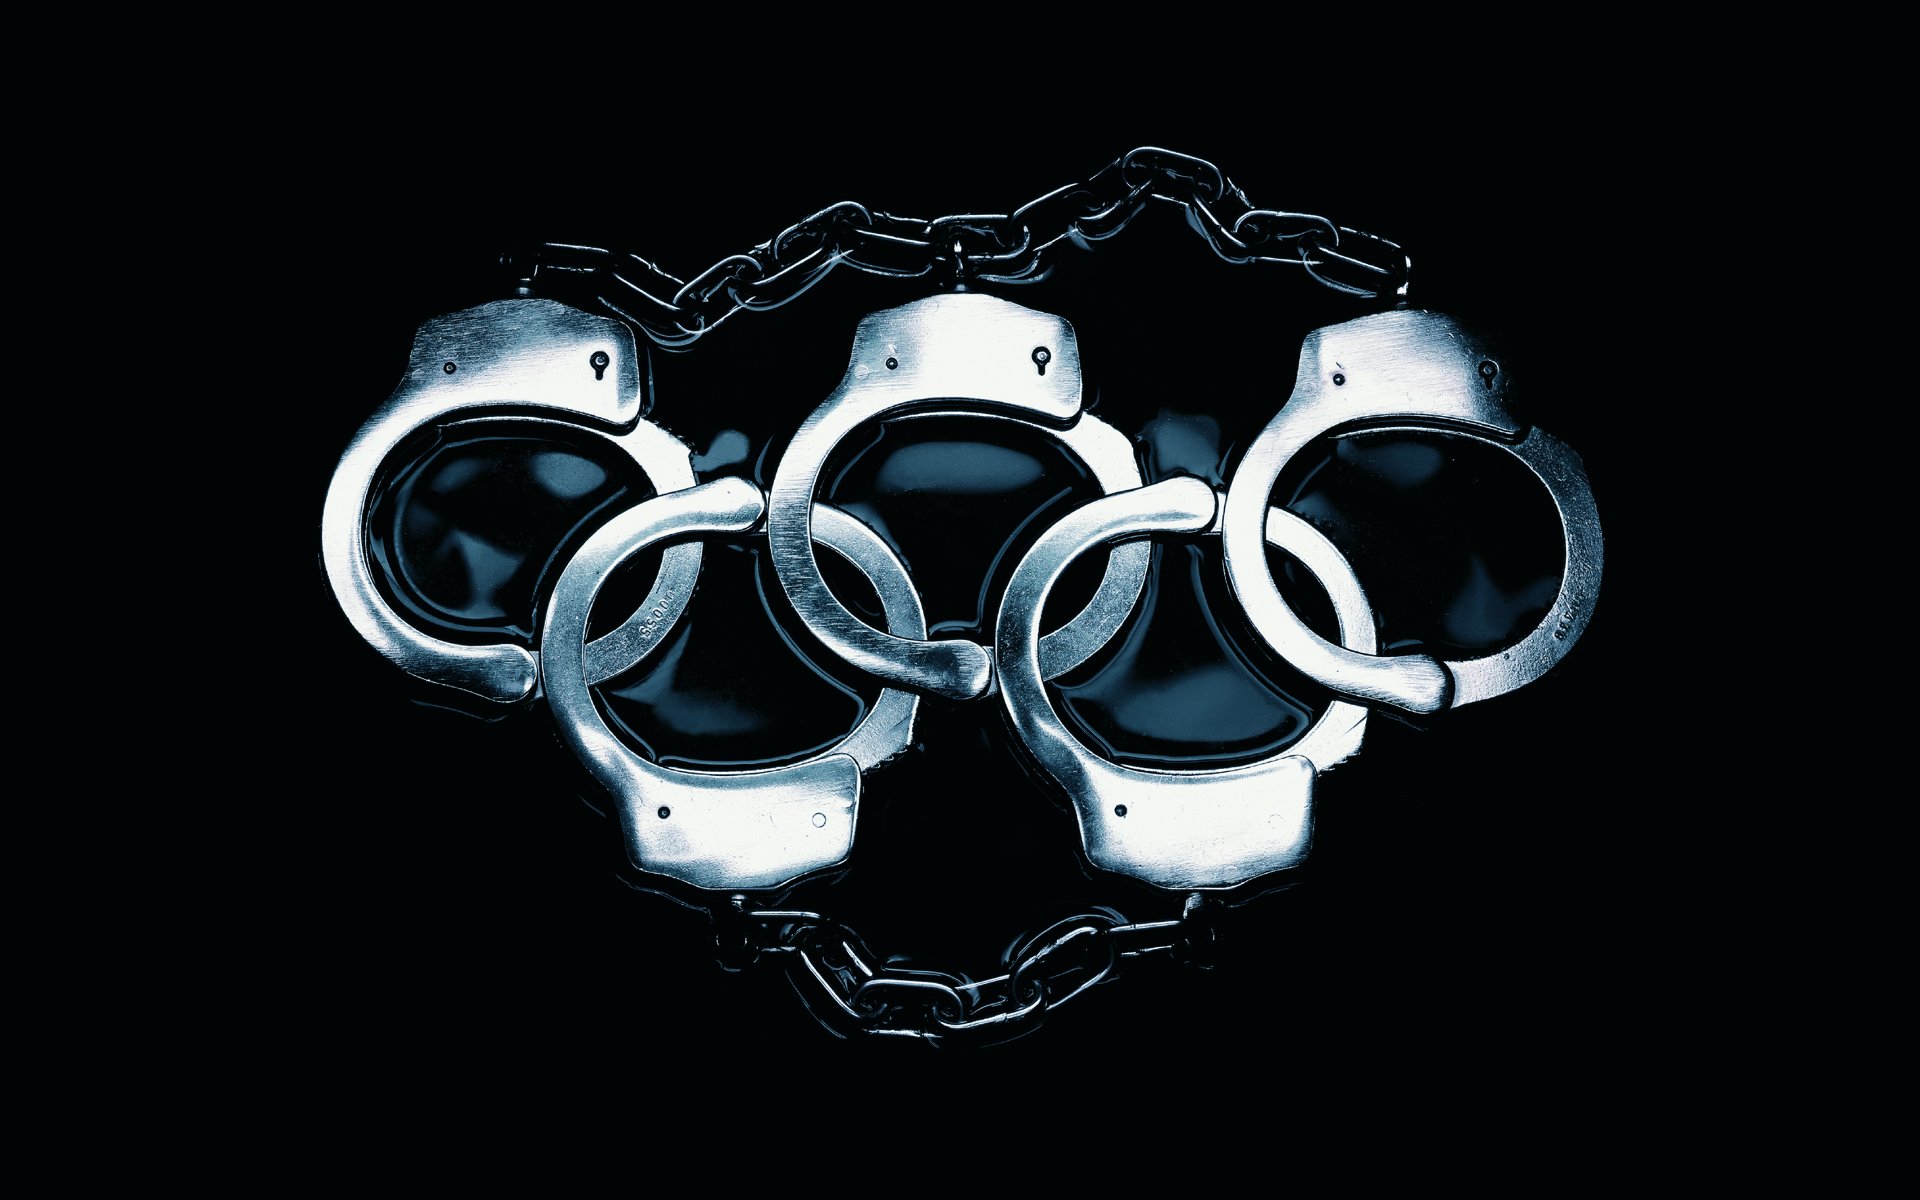 Wallpaper Police Olympic Games Metal Handcuff